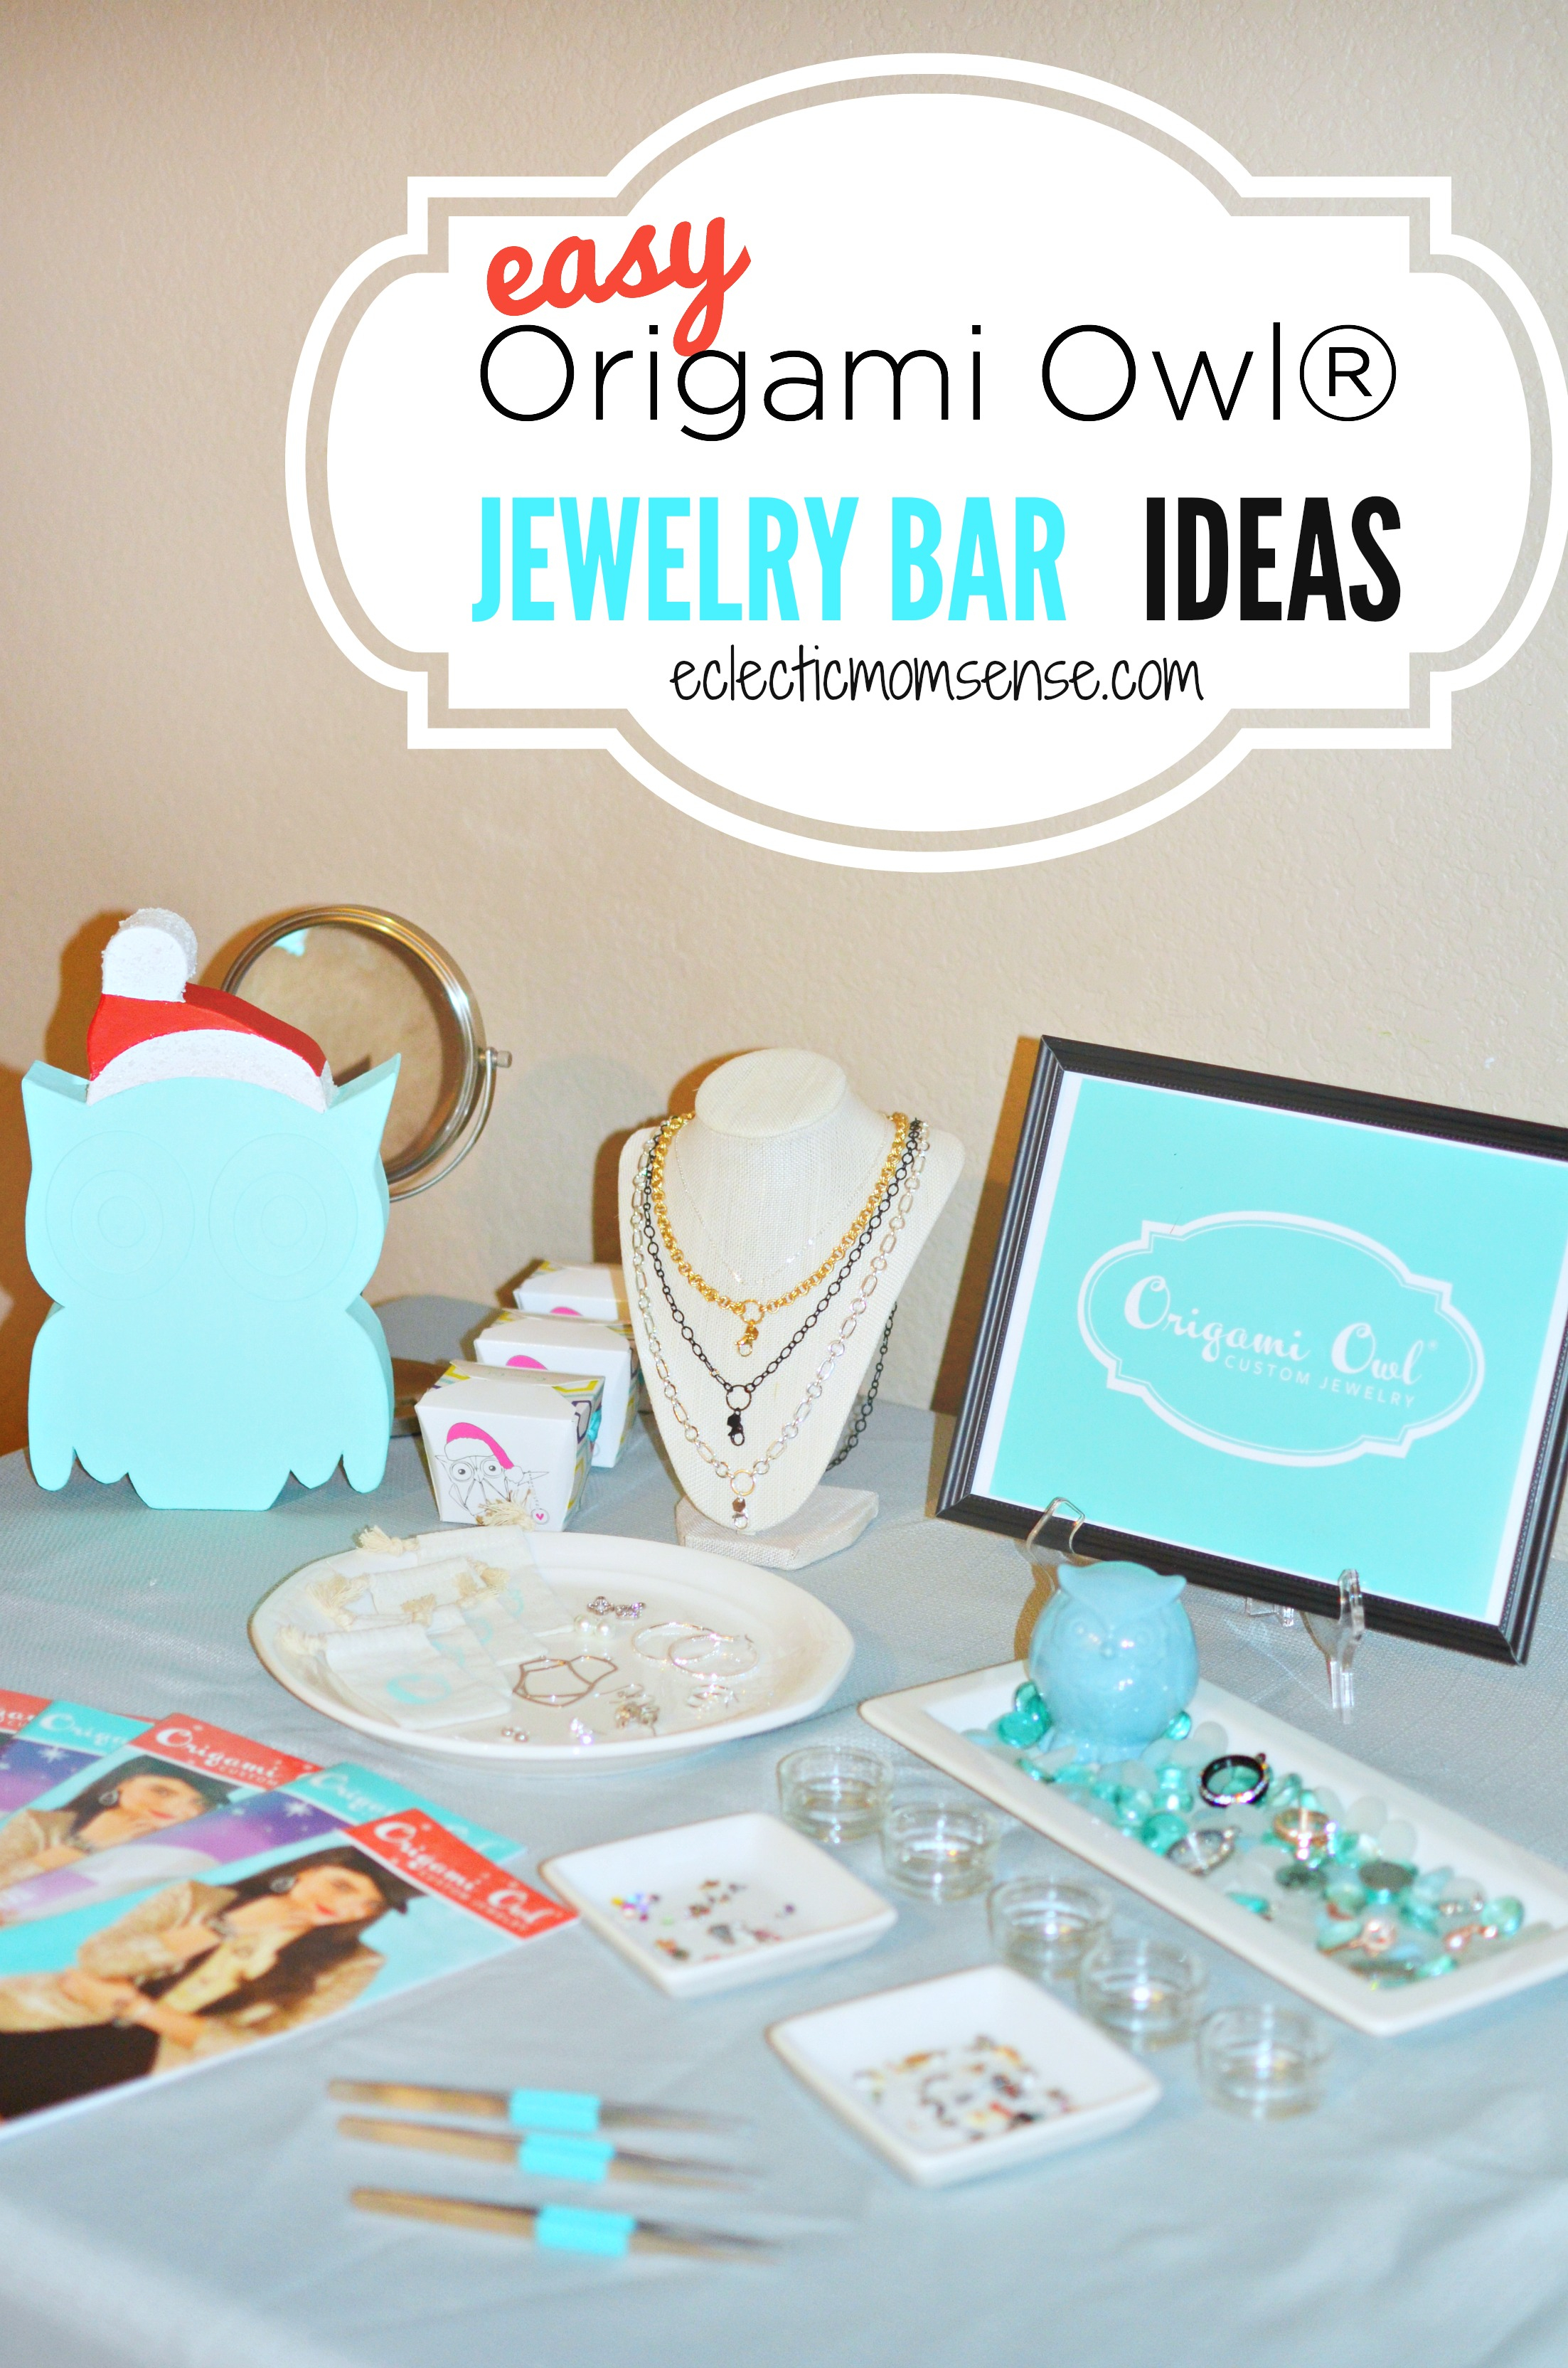 Origami Owl Prices Origami Owl Jewelry Bar Ideas Eclectic Momsense